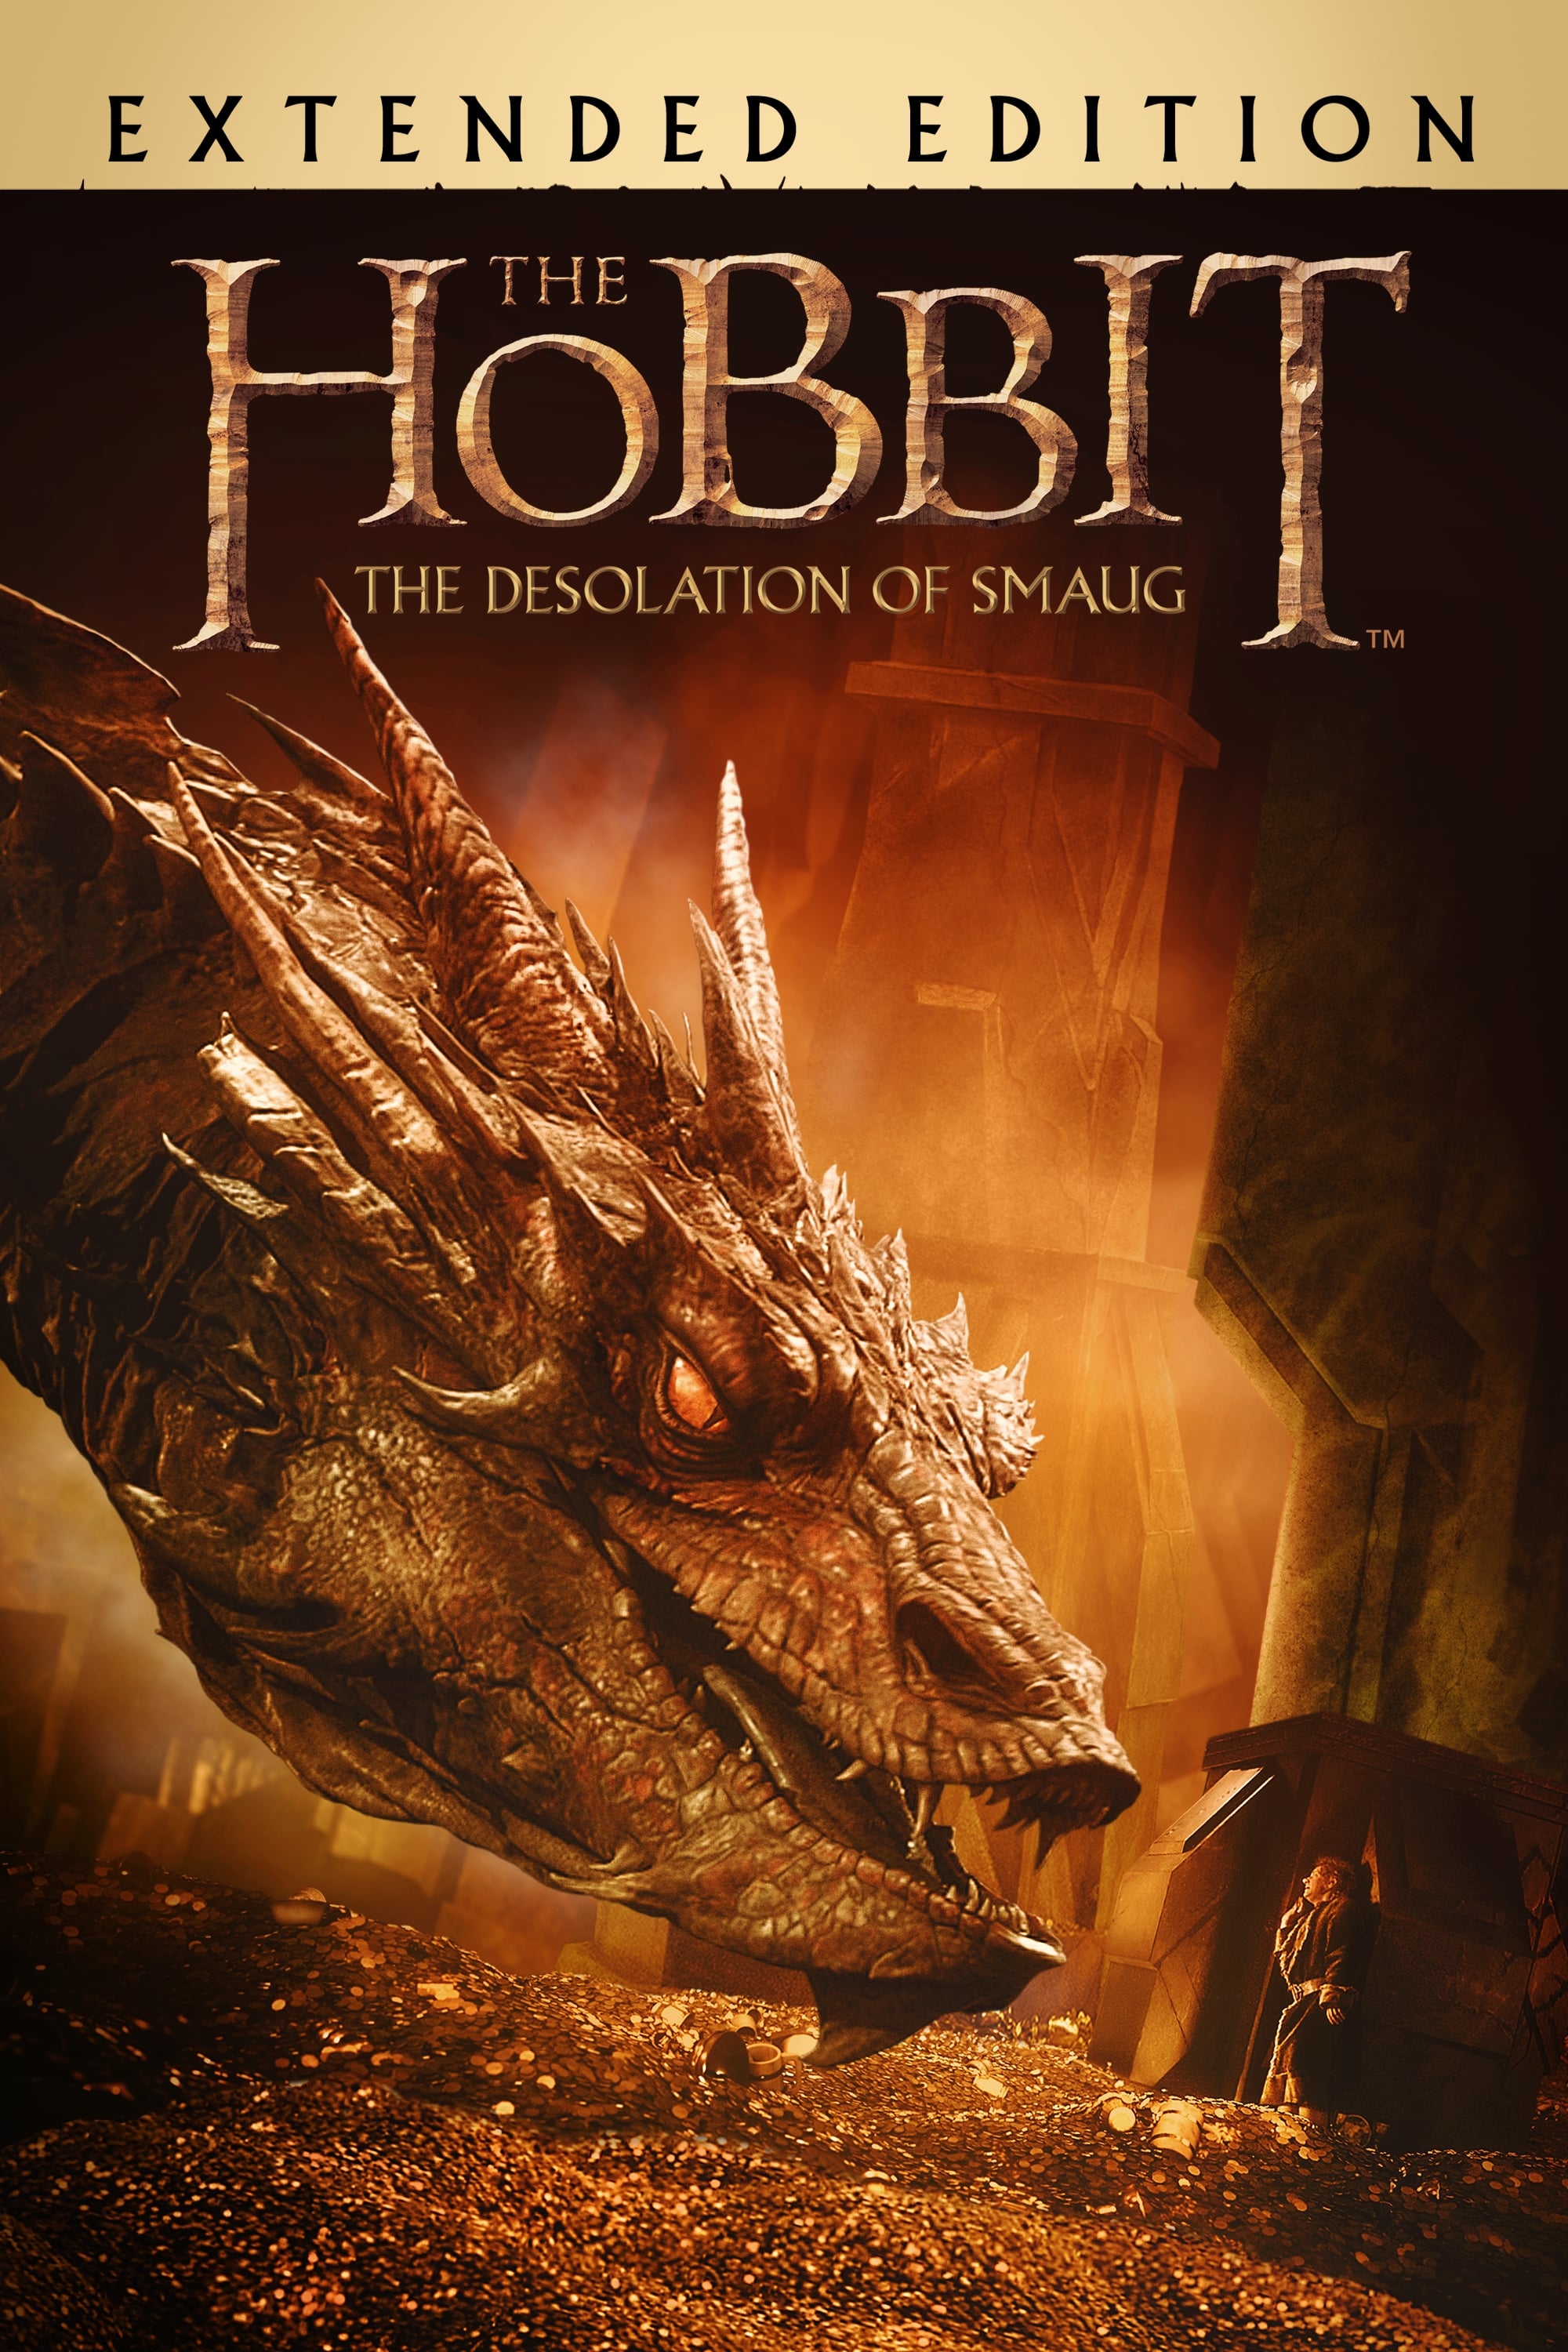 The Hobbit The Desolation of Smaug (2013) [EXTENDED] REMUX 4K HDR Latino – CMHDD